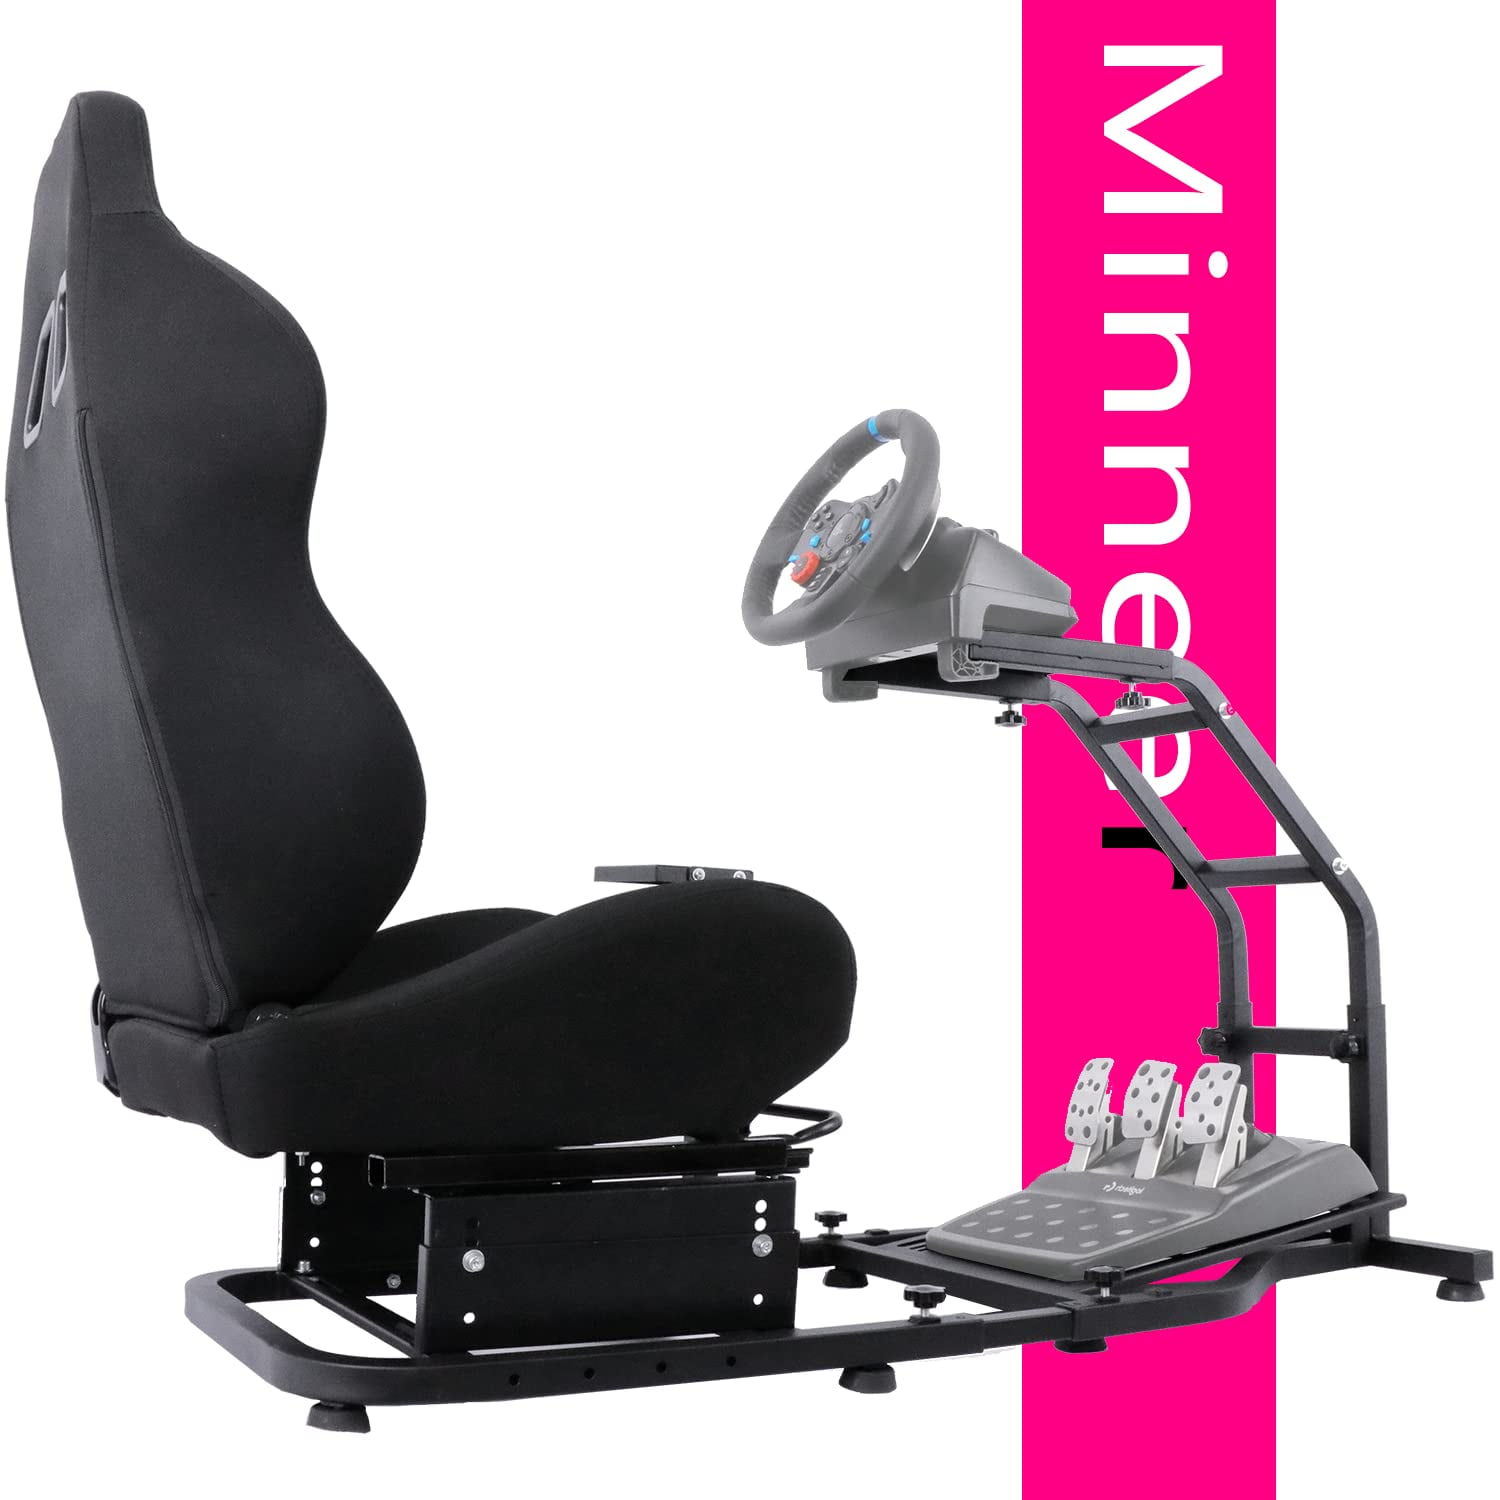 Minneer Racing Simulator Cockpit with Black Seat fit for Logitech G29,G27, G25, G923 Without Wheel and Pedals